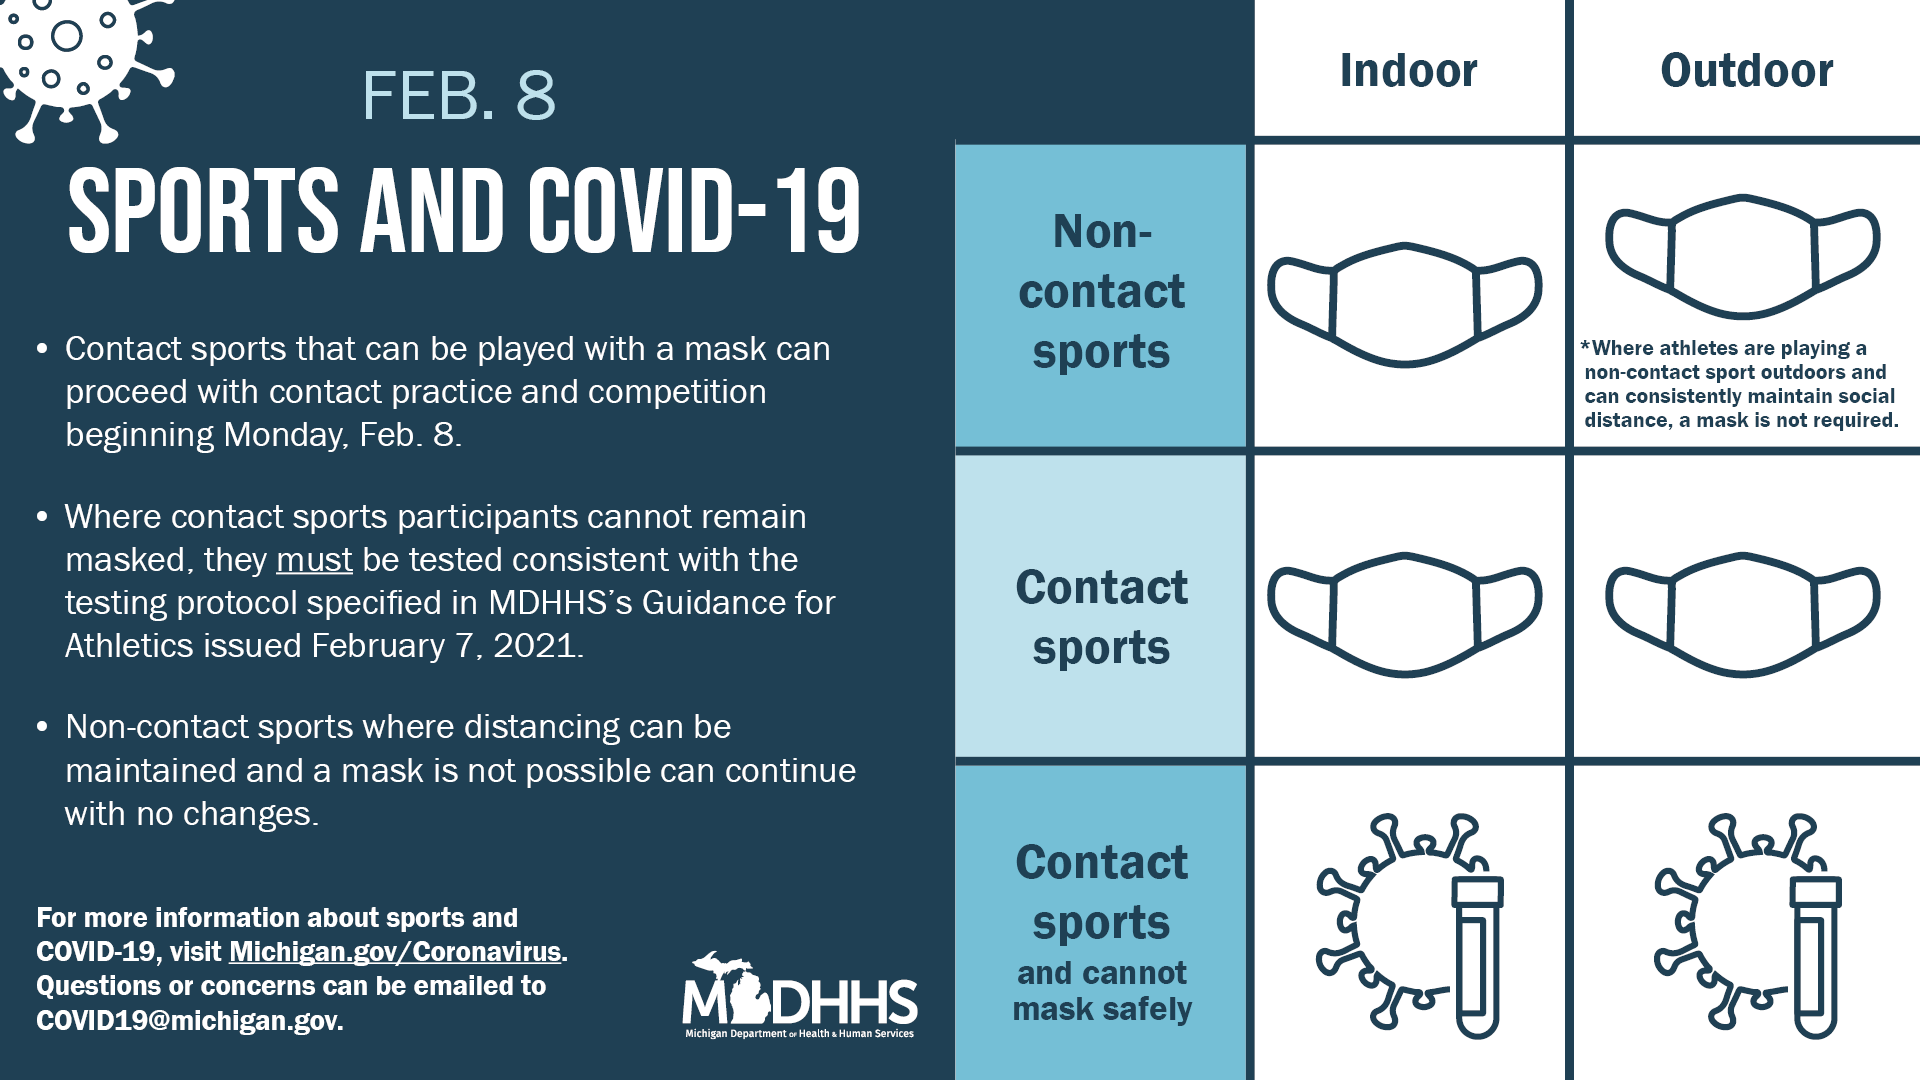 Sports and COVID-19